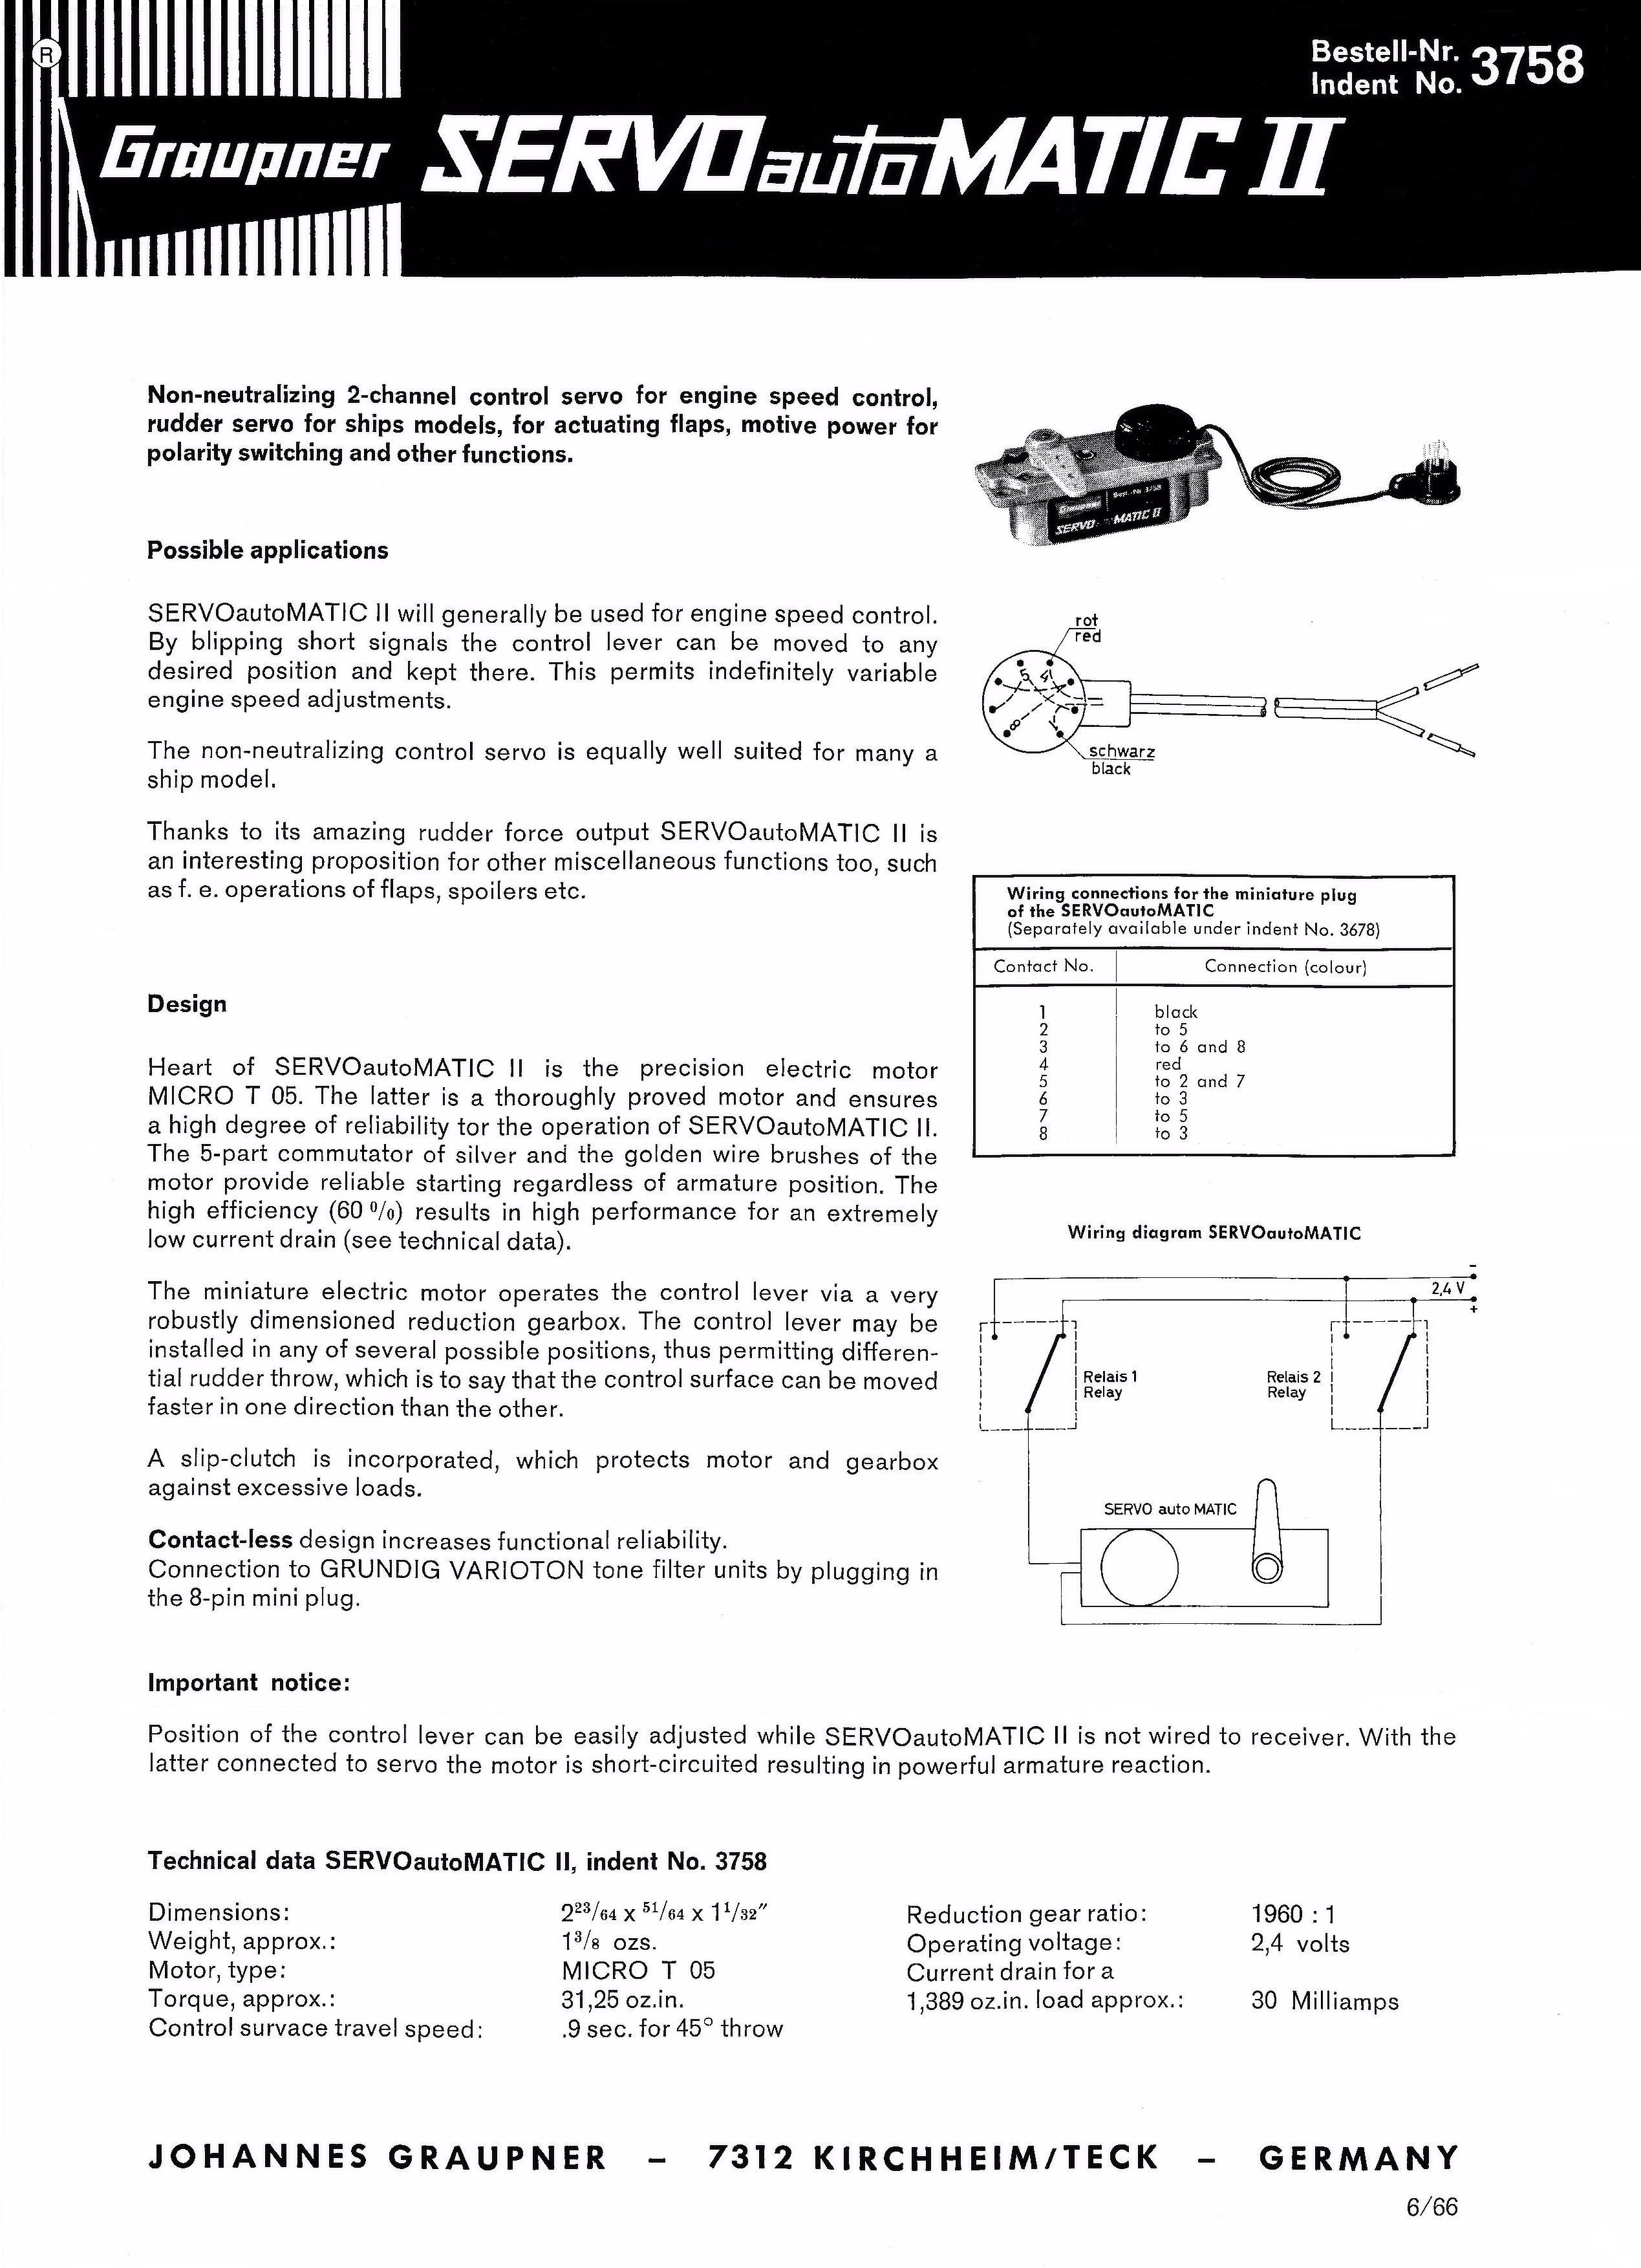 User manual Graupner 8474 (English - 2 pages)